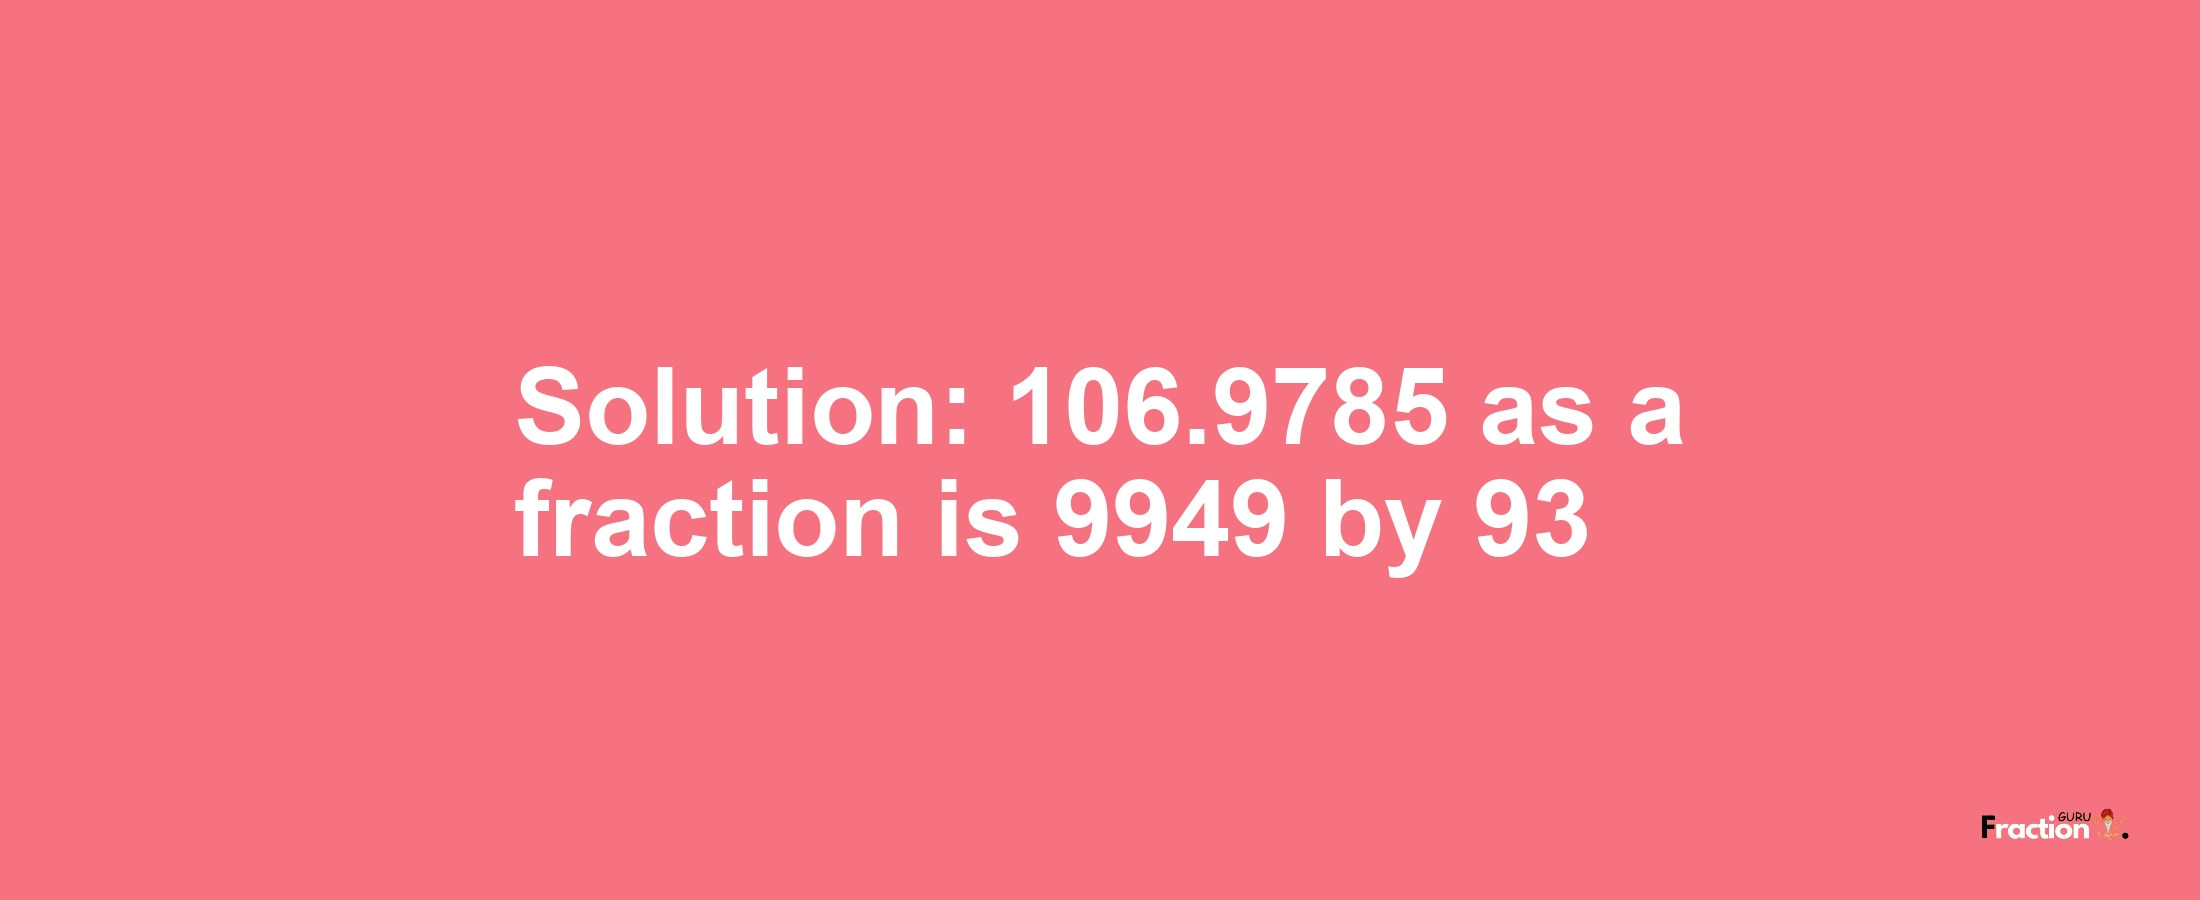 Solution:106.9785 as a fraction is 9949/93